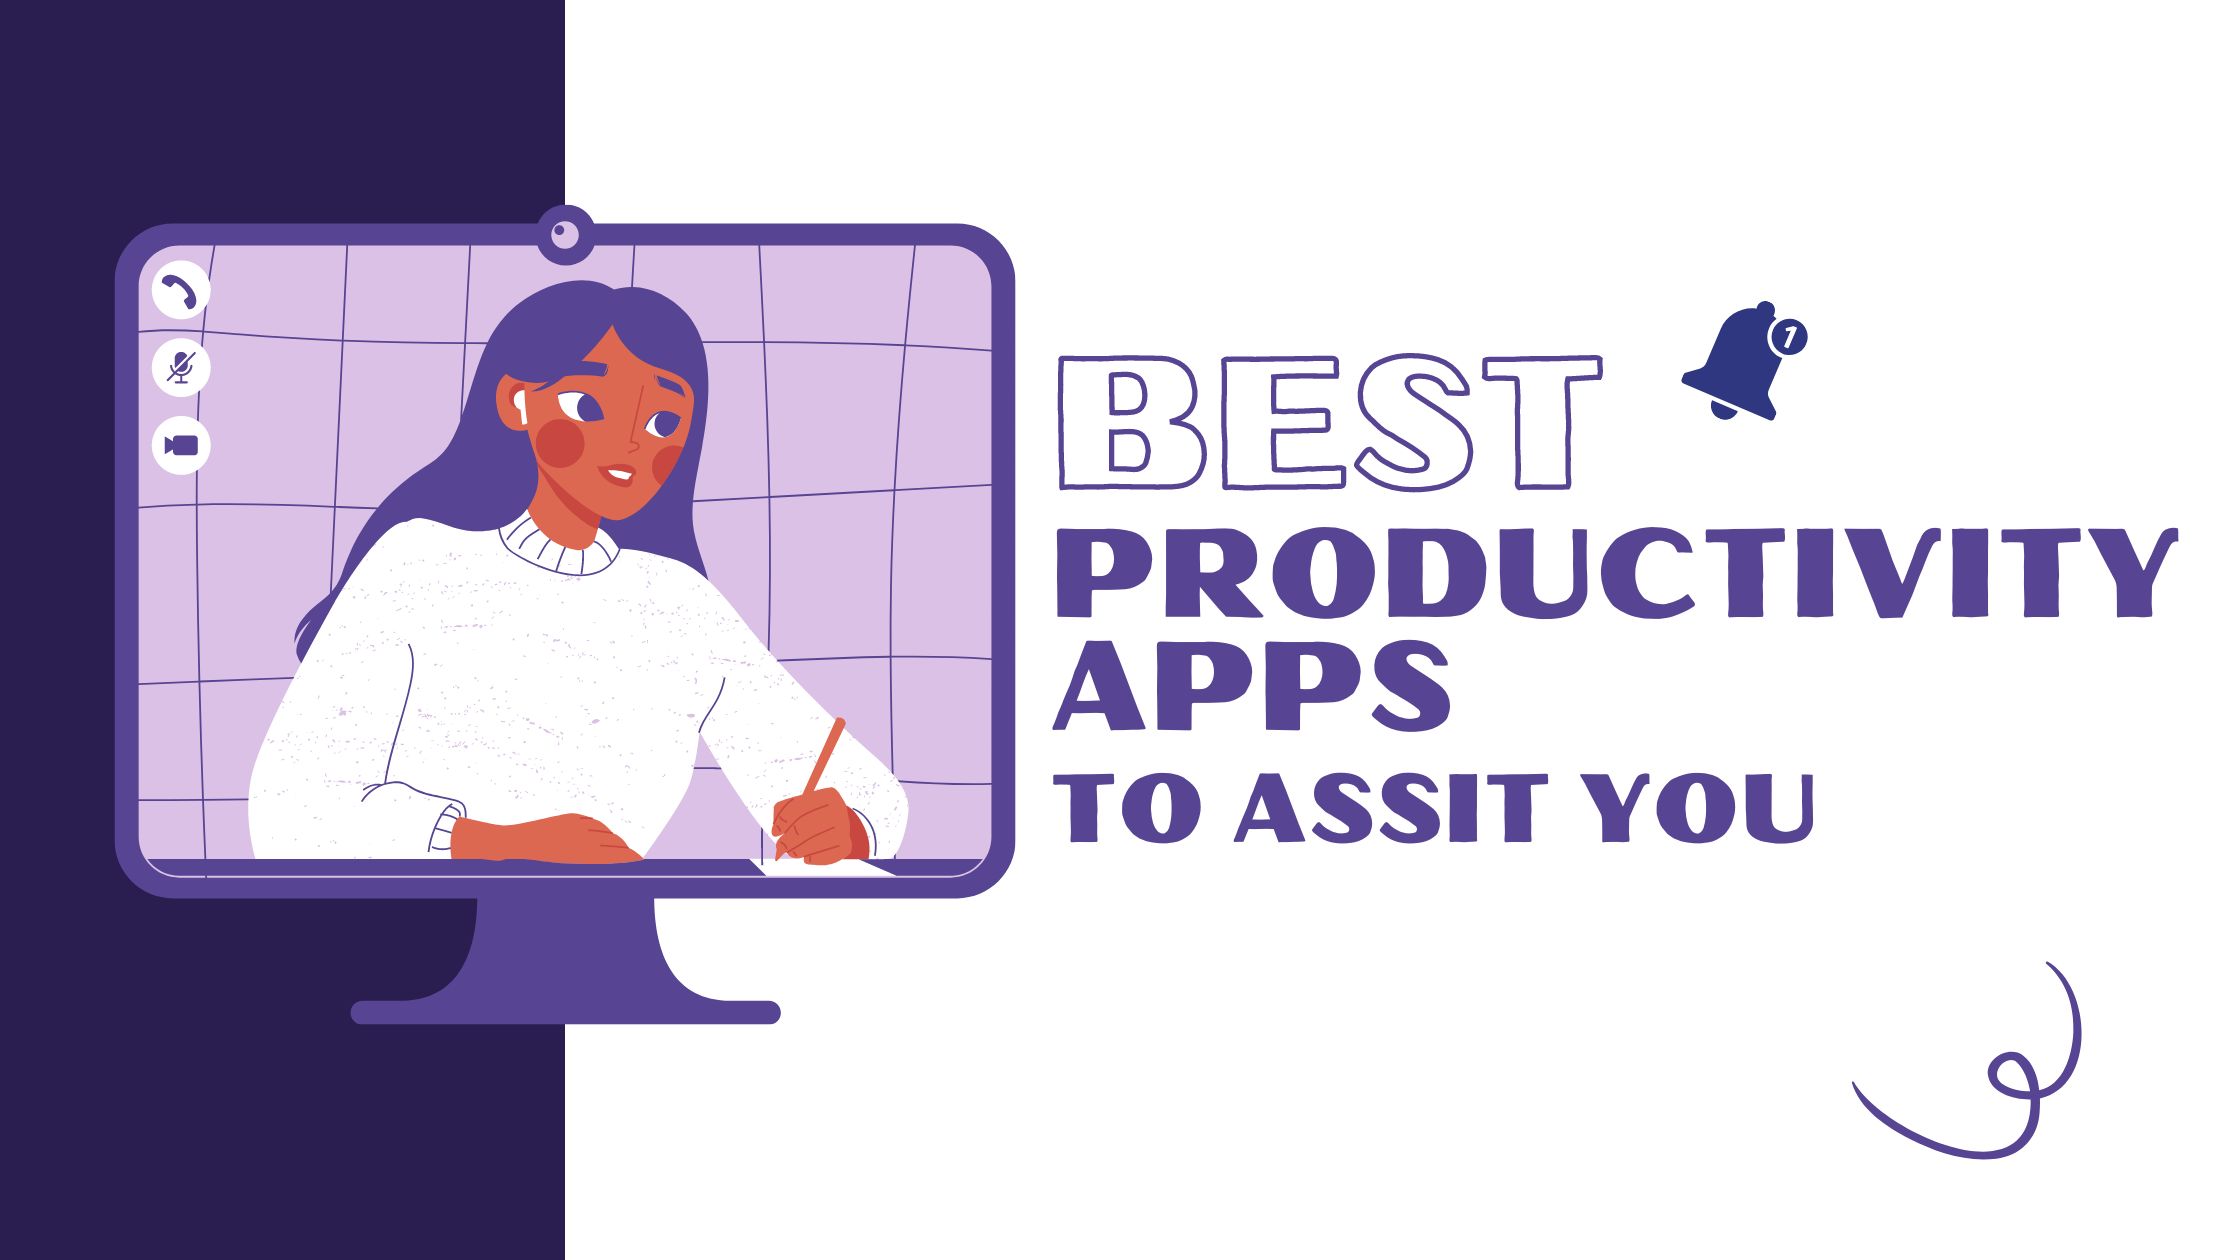 BEST PRODUCTIVITY APPS TO ASSIST YOU